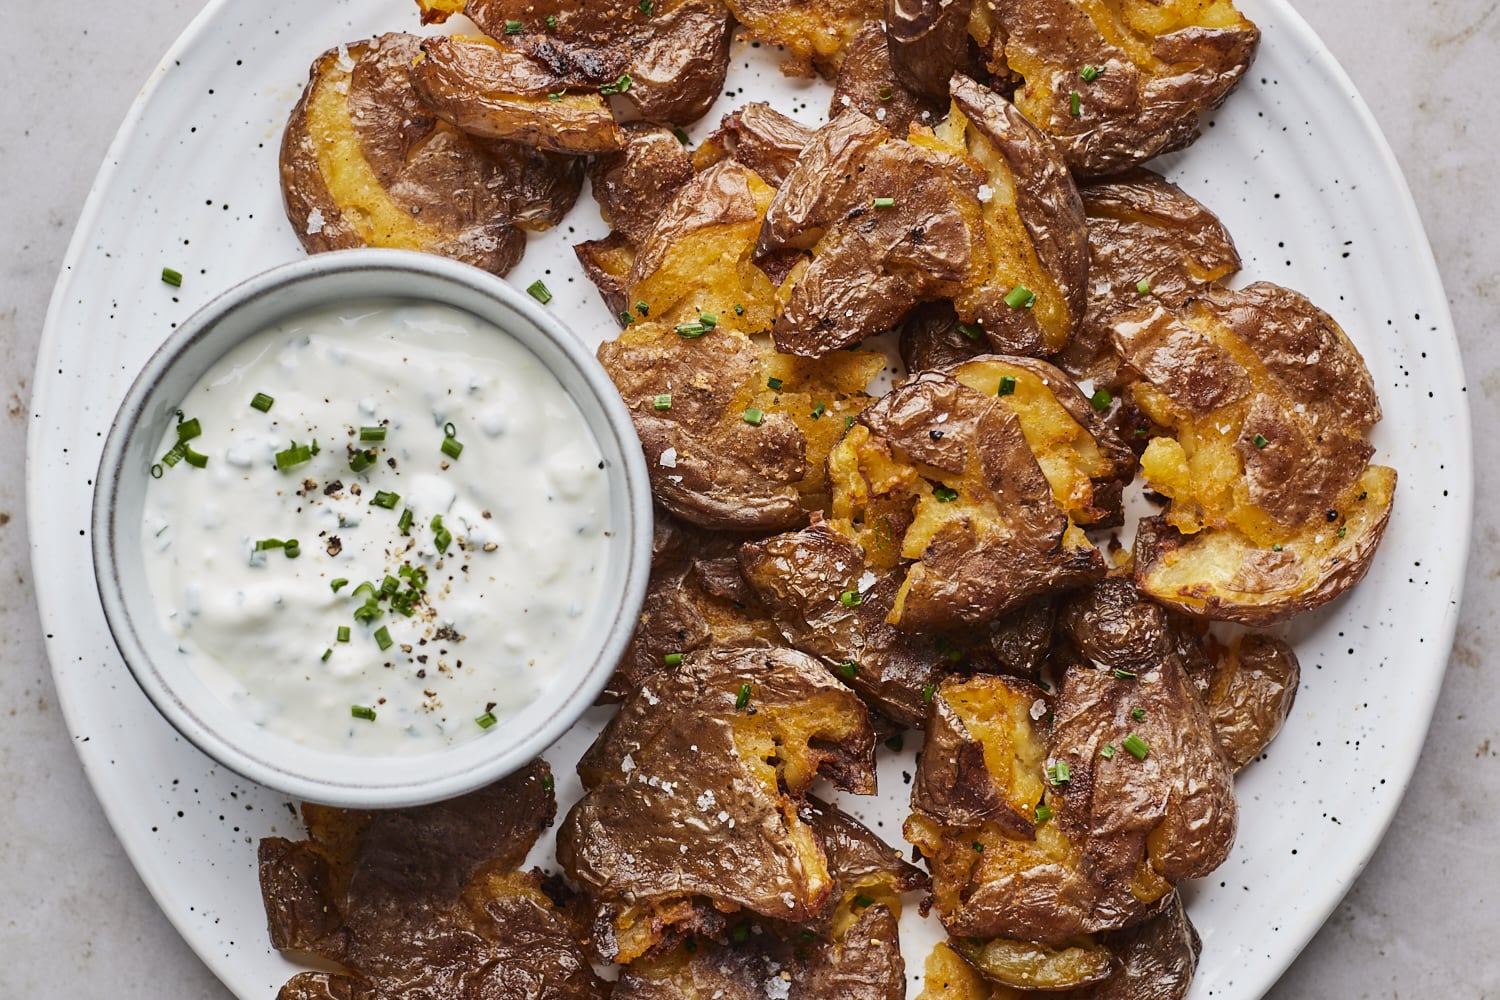 https://www.oliveandmango.com/images/uploads/2022_11_16_crispy_smashed_potatoes_with_sour_cream_and_chive_dip_1.jpg